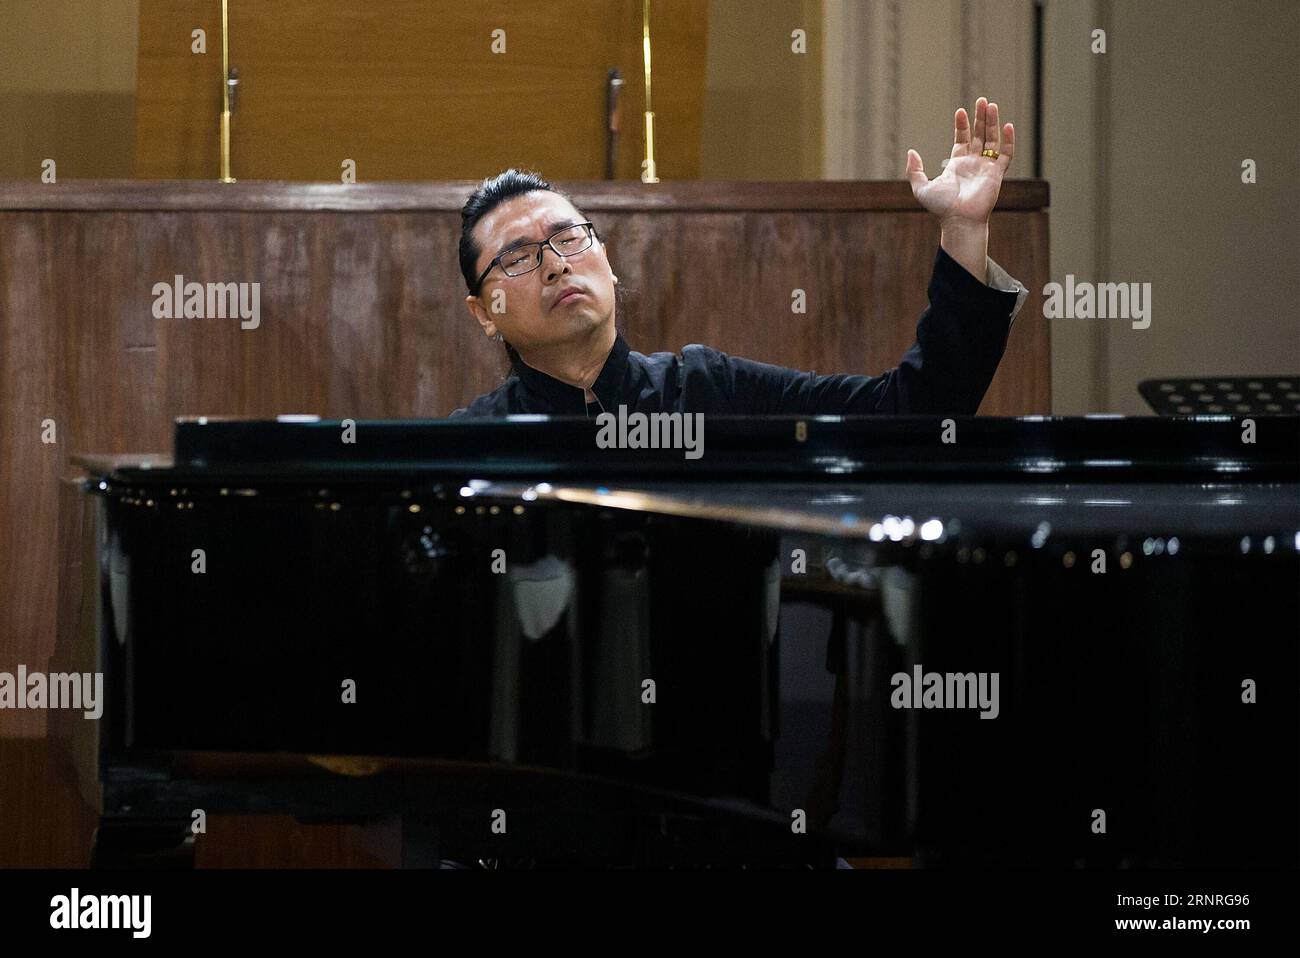 (170930) -- ROME, Sept. 30, 2017 -- Chinese pianist Liu Xingchen performs during an activity of introducing ancient Chinese arts at Santa Cecilia Conservatory in Rome, capital of Italy, on Sept. 28, 2017. Italian audiences were treated to the melody of the pipa, or Chinese lute, as played by Chinese contemporary musicians in a theater here decorated with ancient Chinese paintings. ) (yy) ITALY-ROME-CHINESE TRADITIONAL MUSIC AND ART-SHOW jinxyu PUBLICATIONxNOTxINxCHN Stock Photo